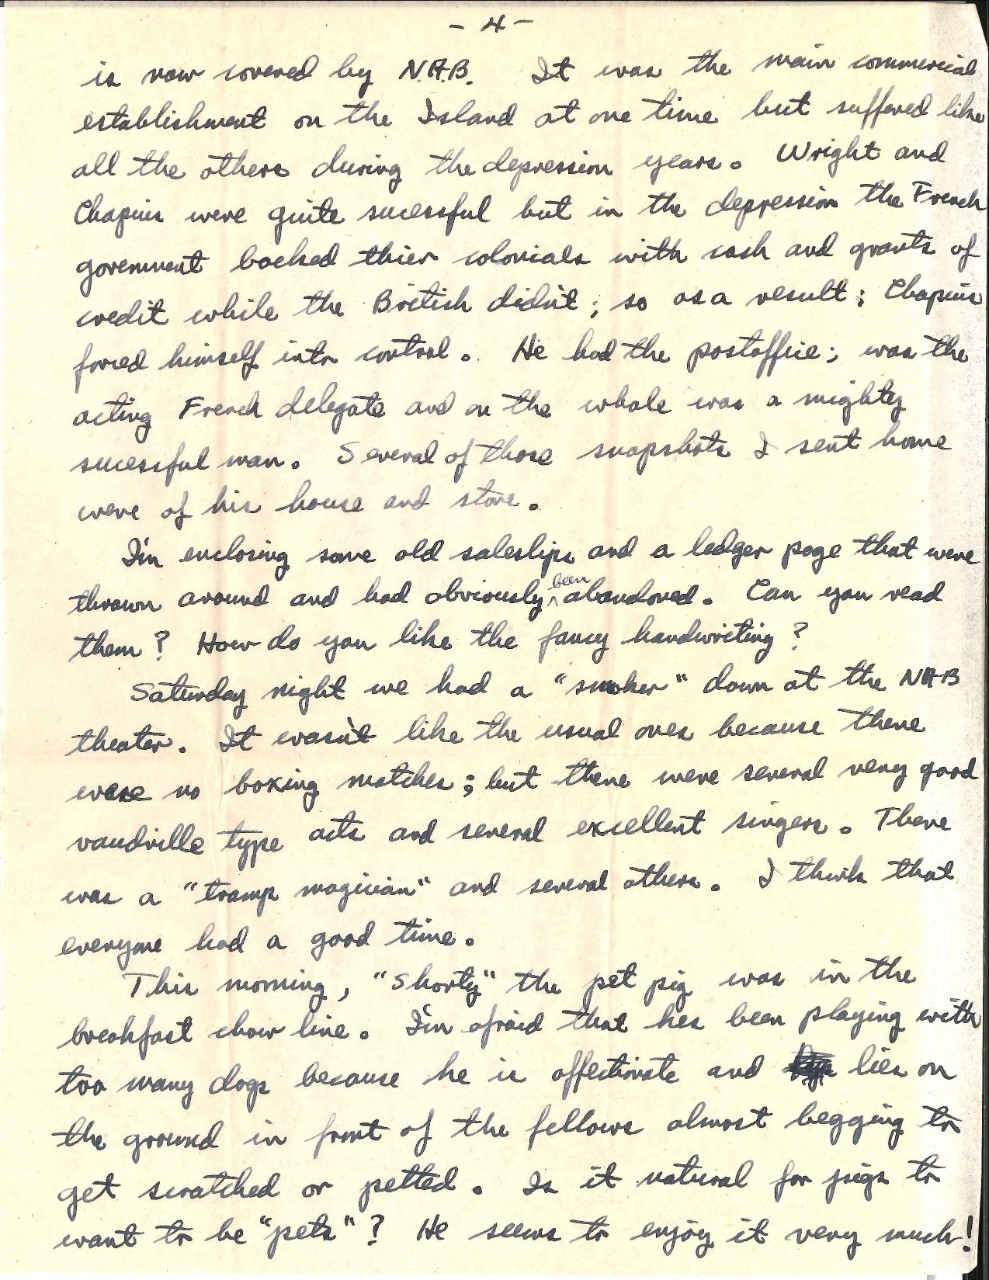 Letter from Wright to his parents, Sep. 26, 1945, page 4